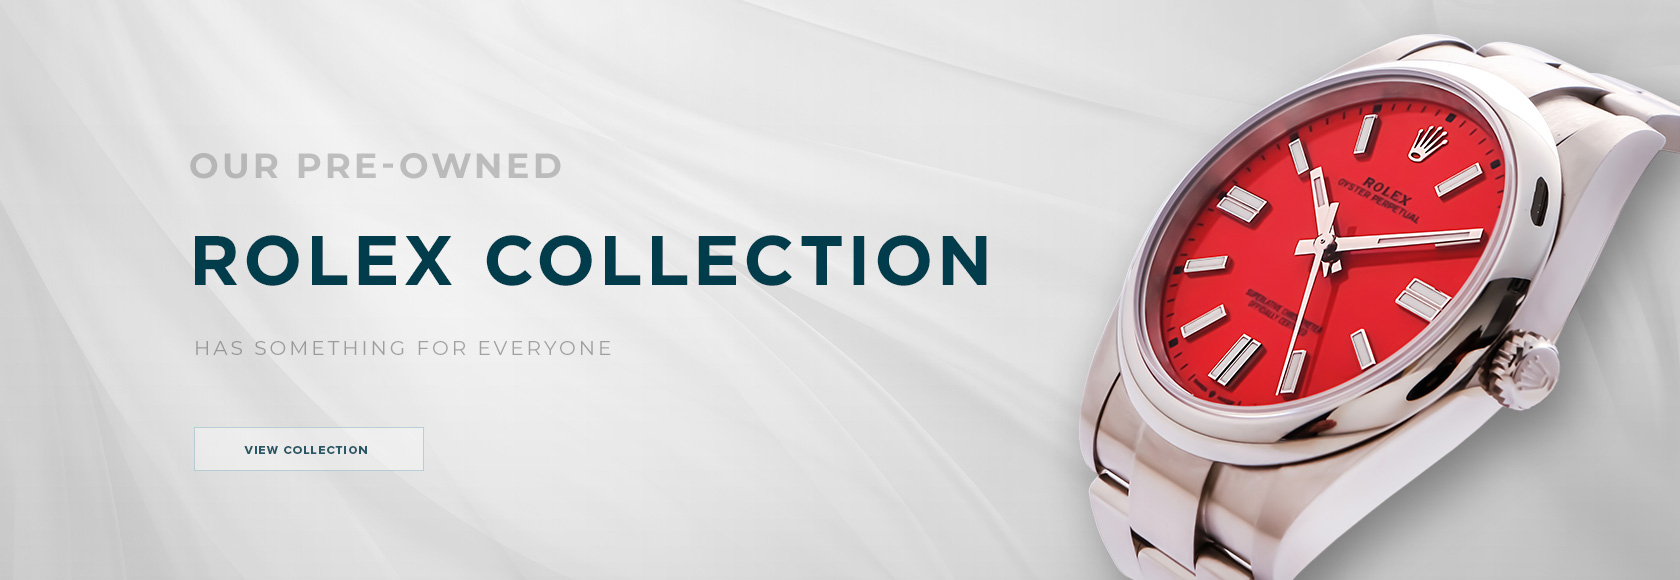 View Our Pre-Owned Rolex Collection